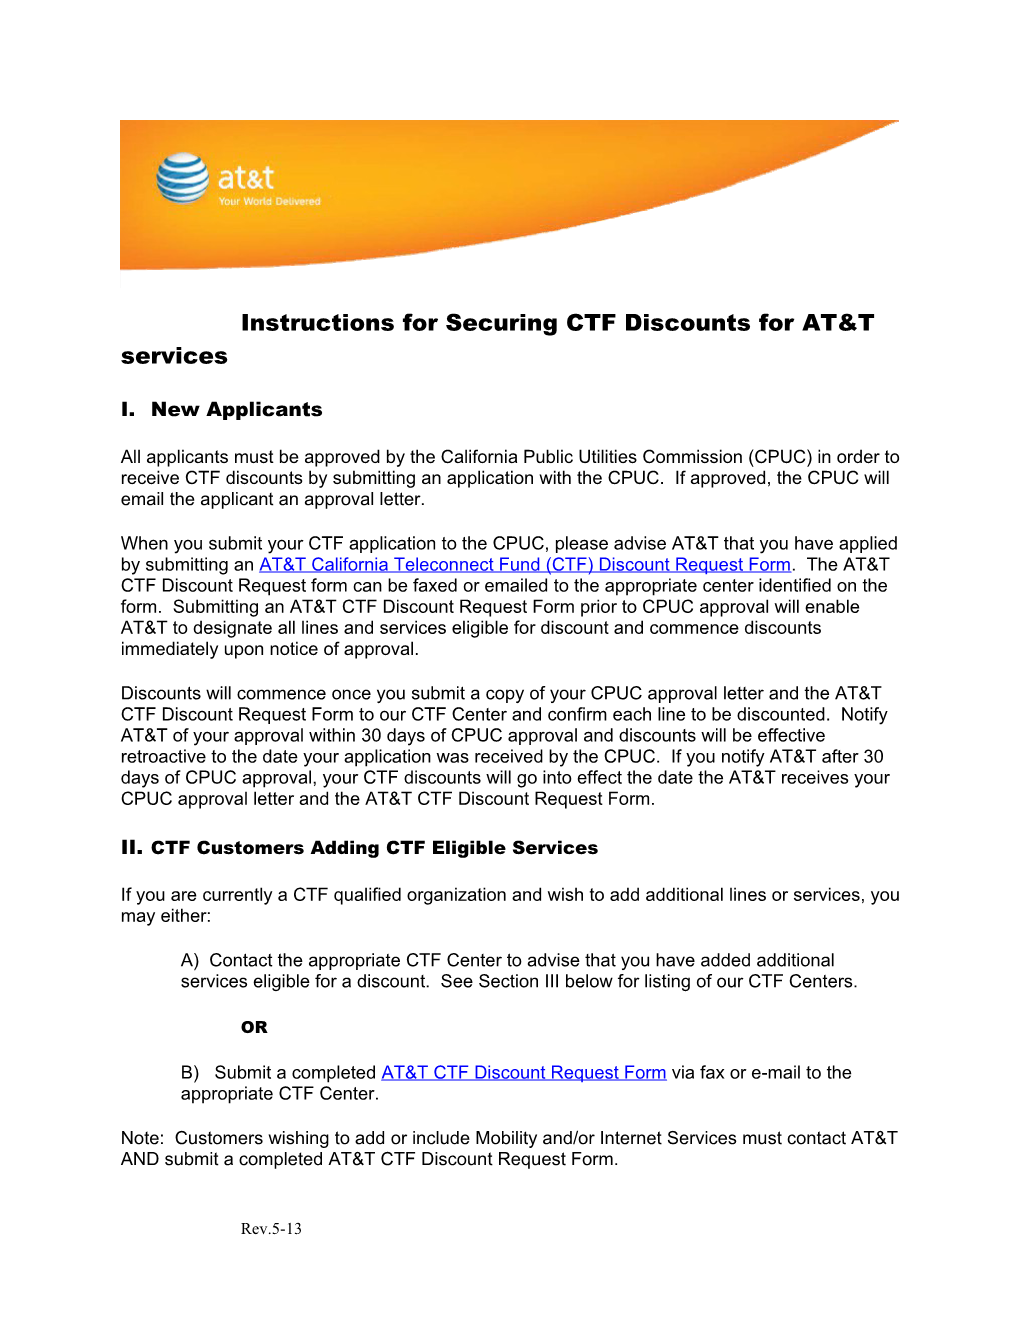 Instructions for Securing CTF Discounts for AT&T Services